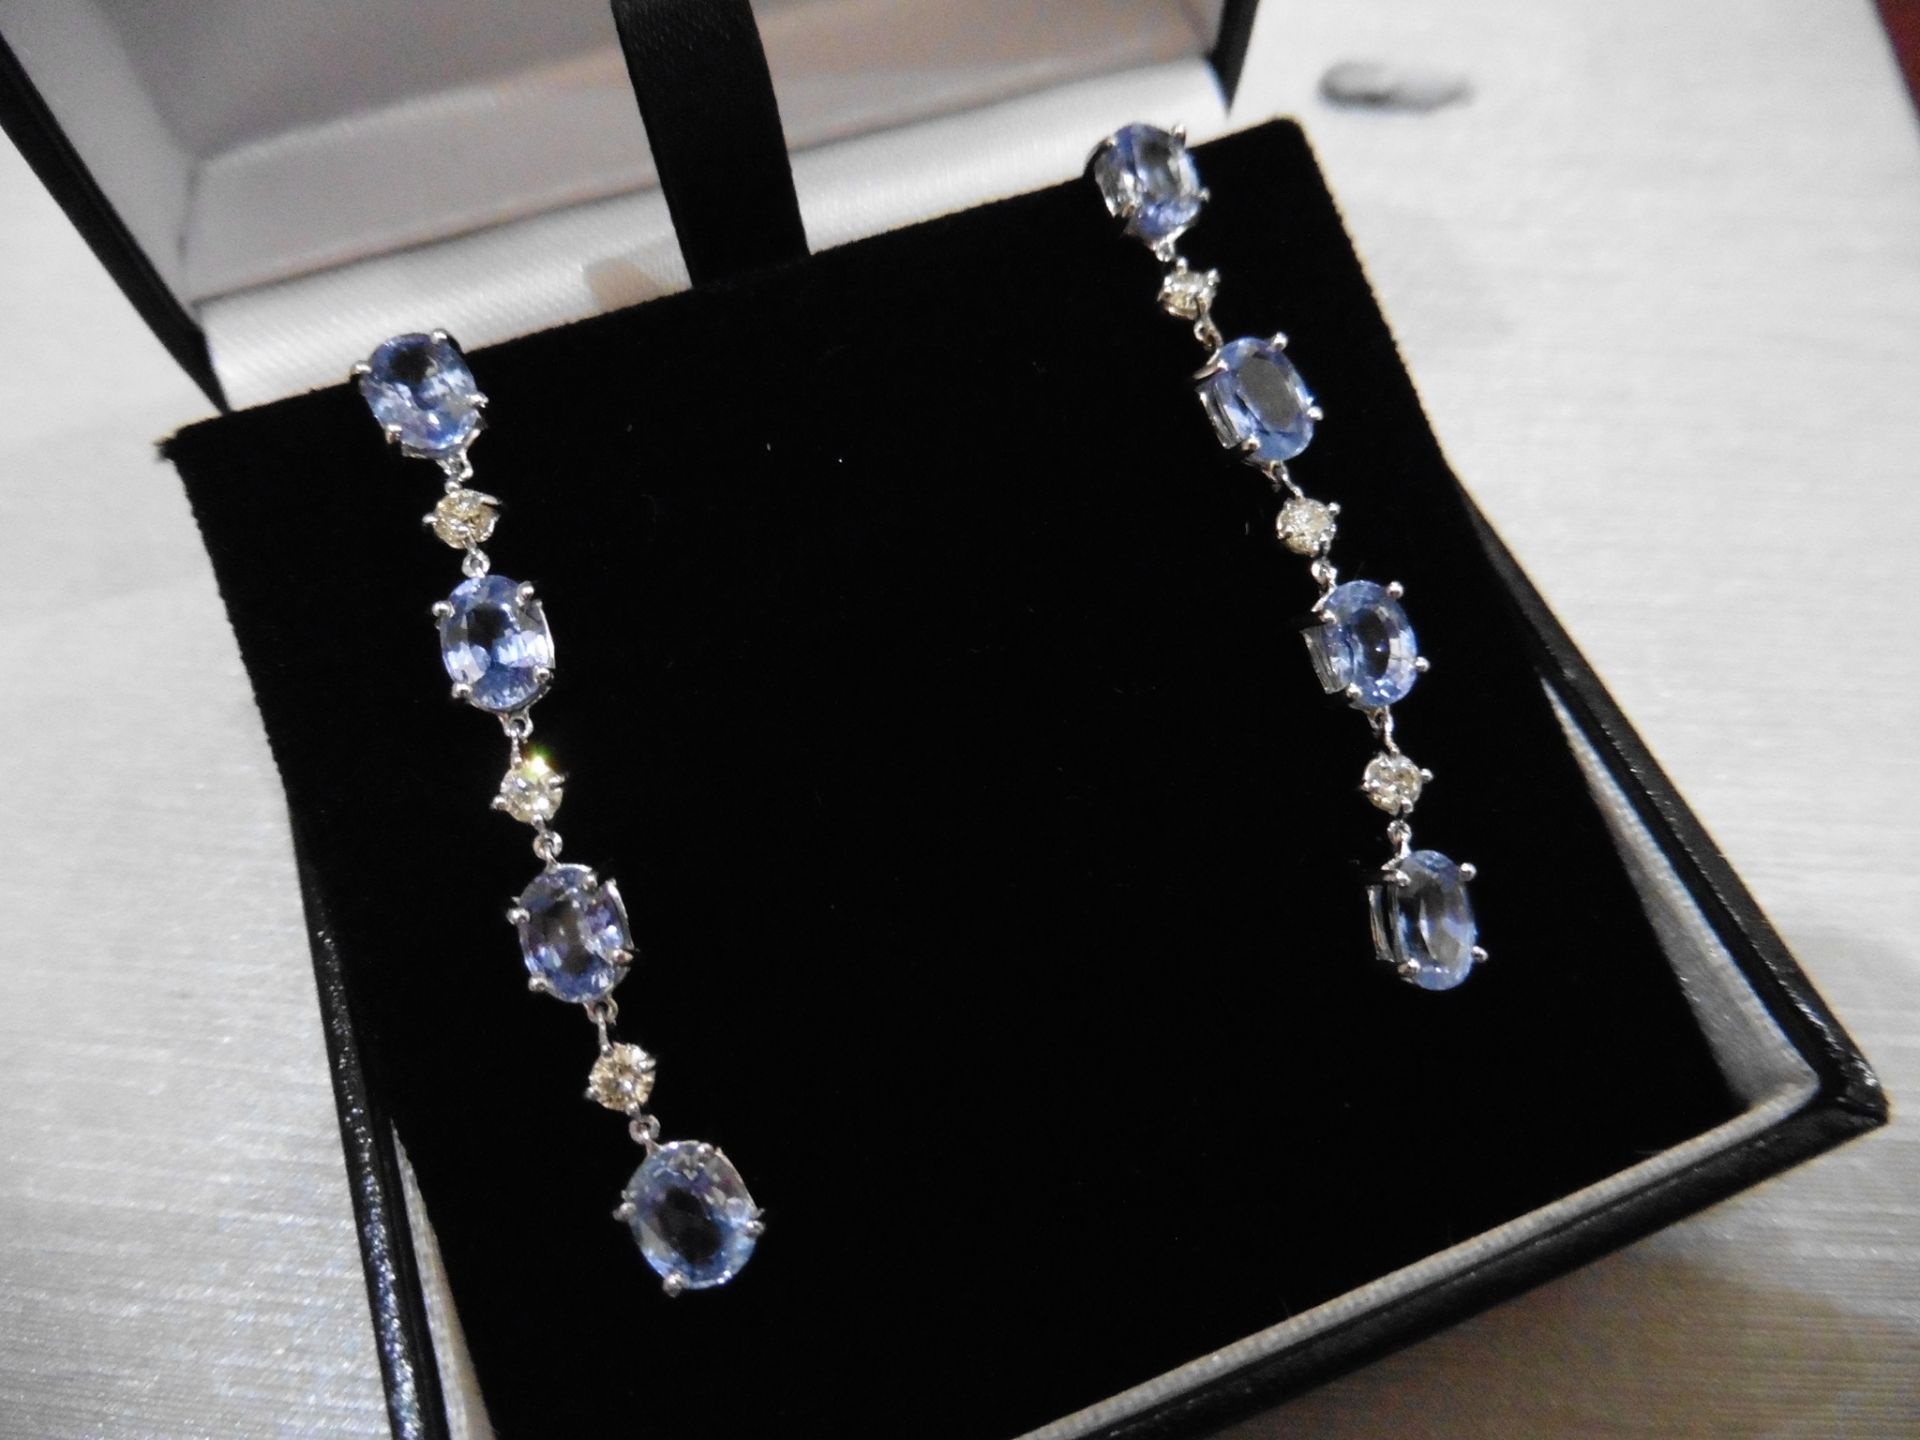 3ct ceylon sapphire and diamond drop earrings. Each set with 4 oval cut sapphires and 3 brilliant - Image 4 of 5